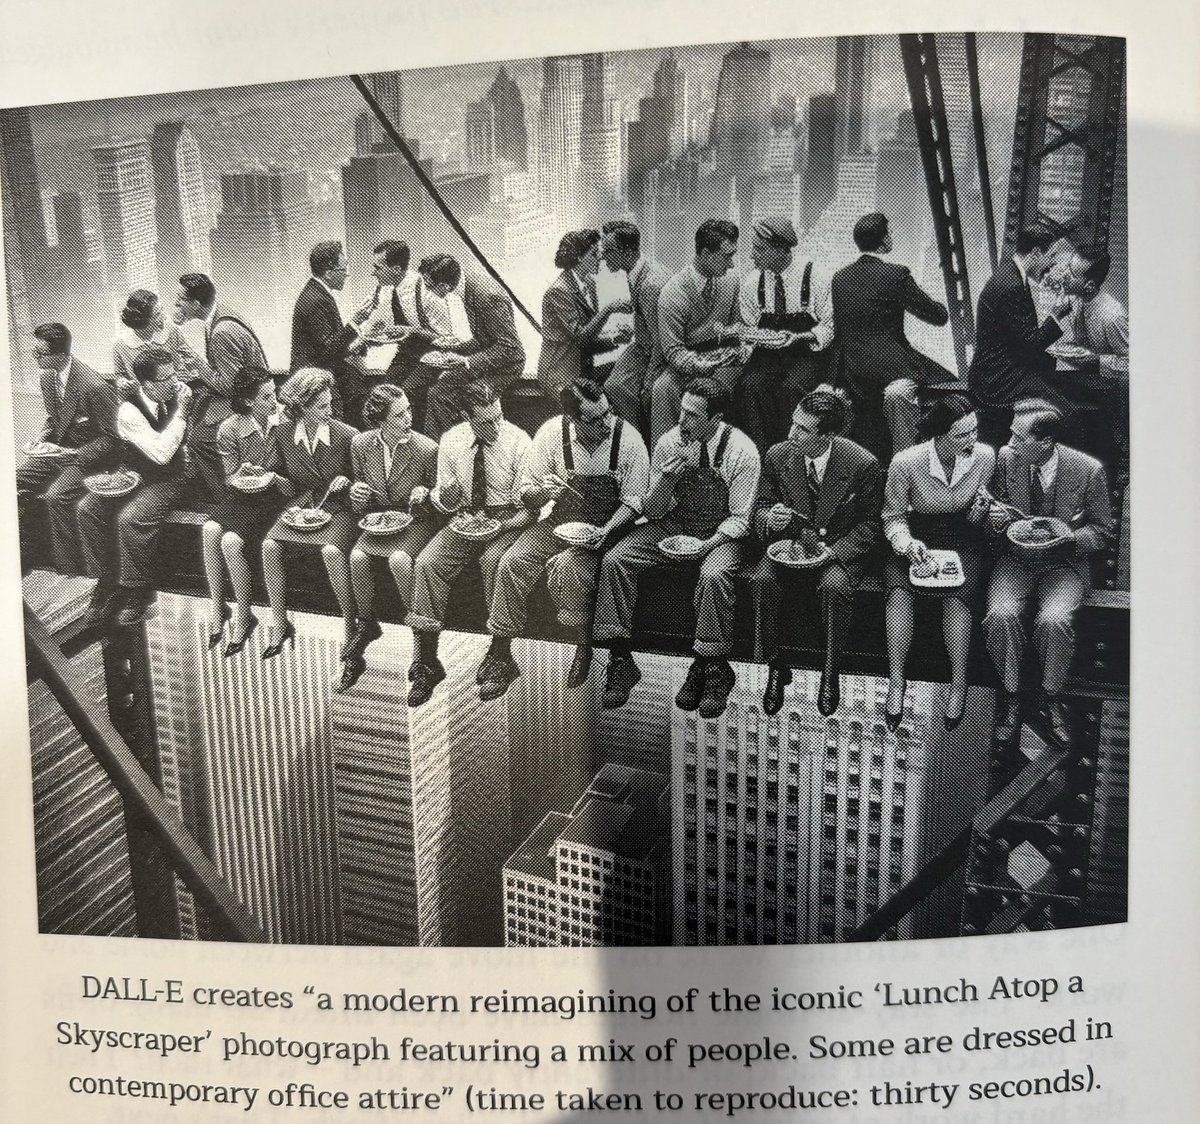 Find your favourite movie. Or music track. Or novel. Is there something about work in there? this is Chat GPT's rendition in my book (yes it's illustrated) of 'Lunch Atop a Skyscraper' which is now also a tourist attraction (called The Beam) #workingassumptions @rockcenternyc